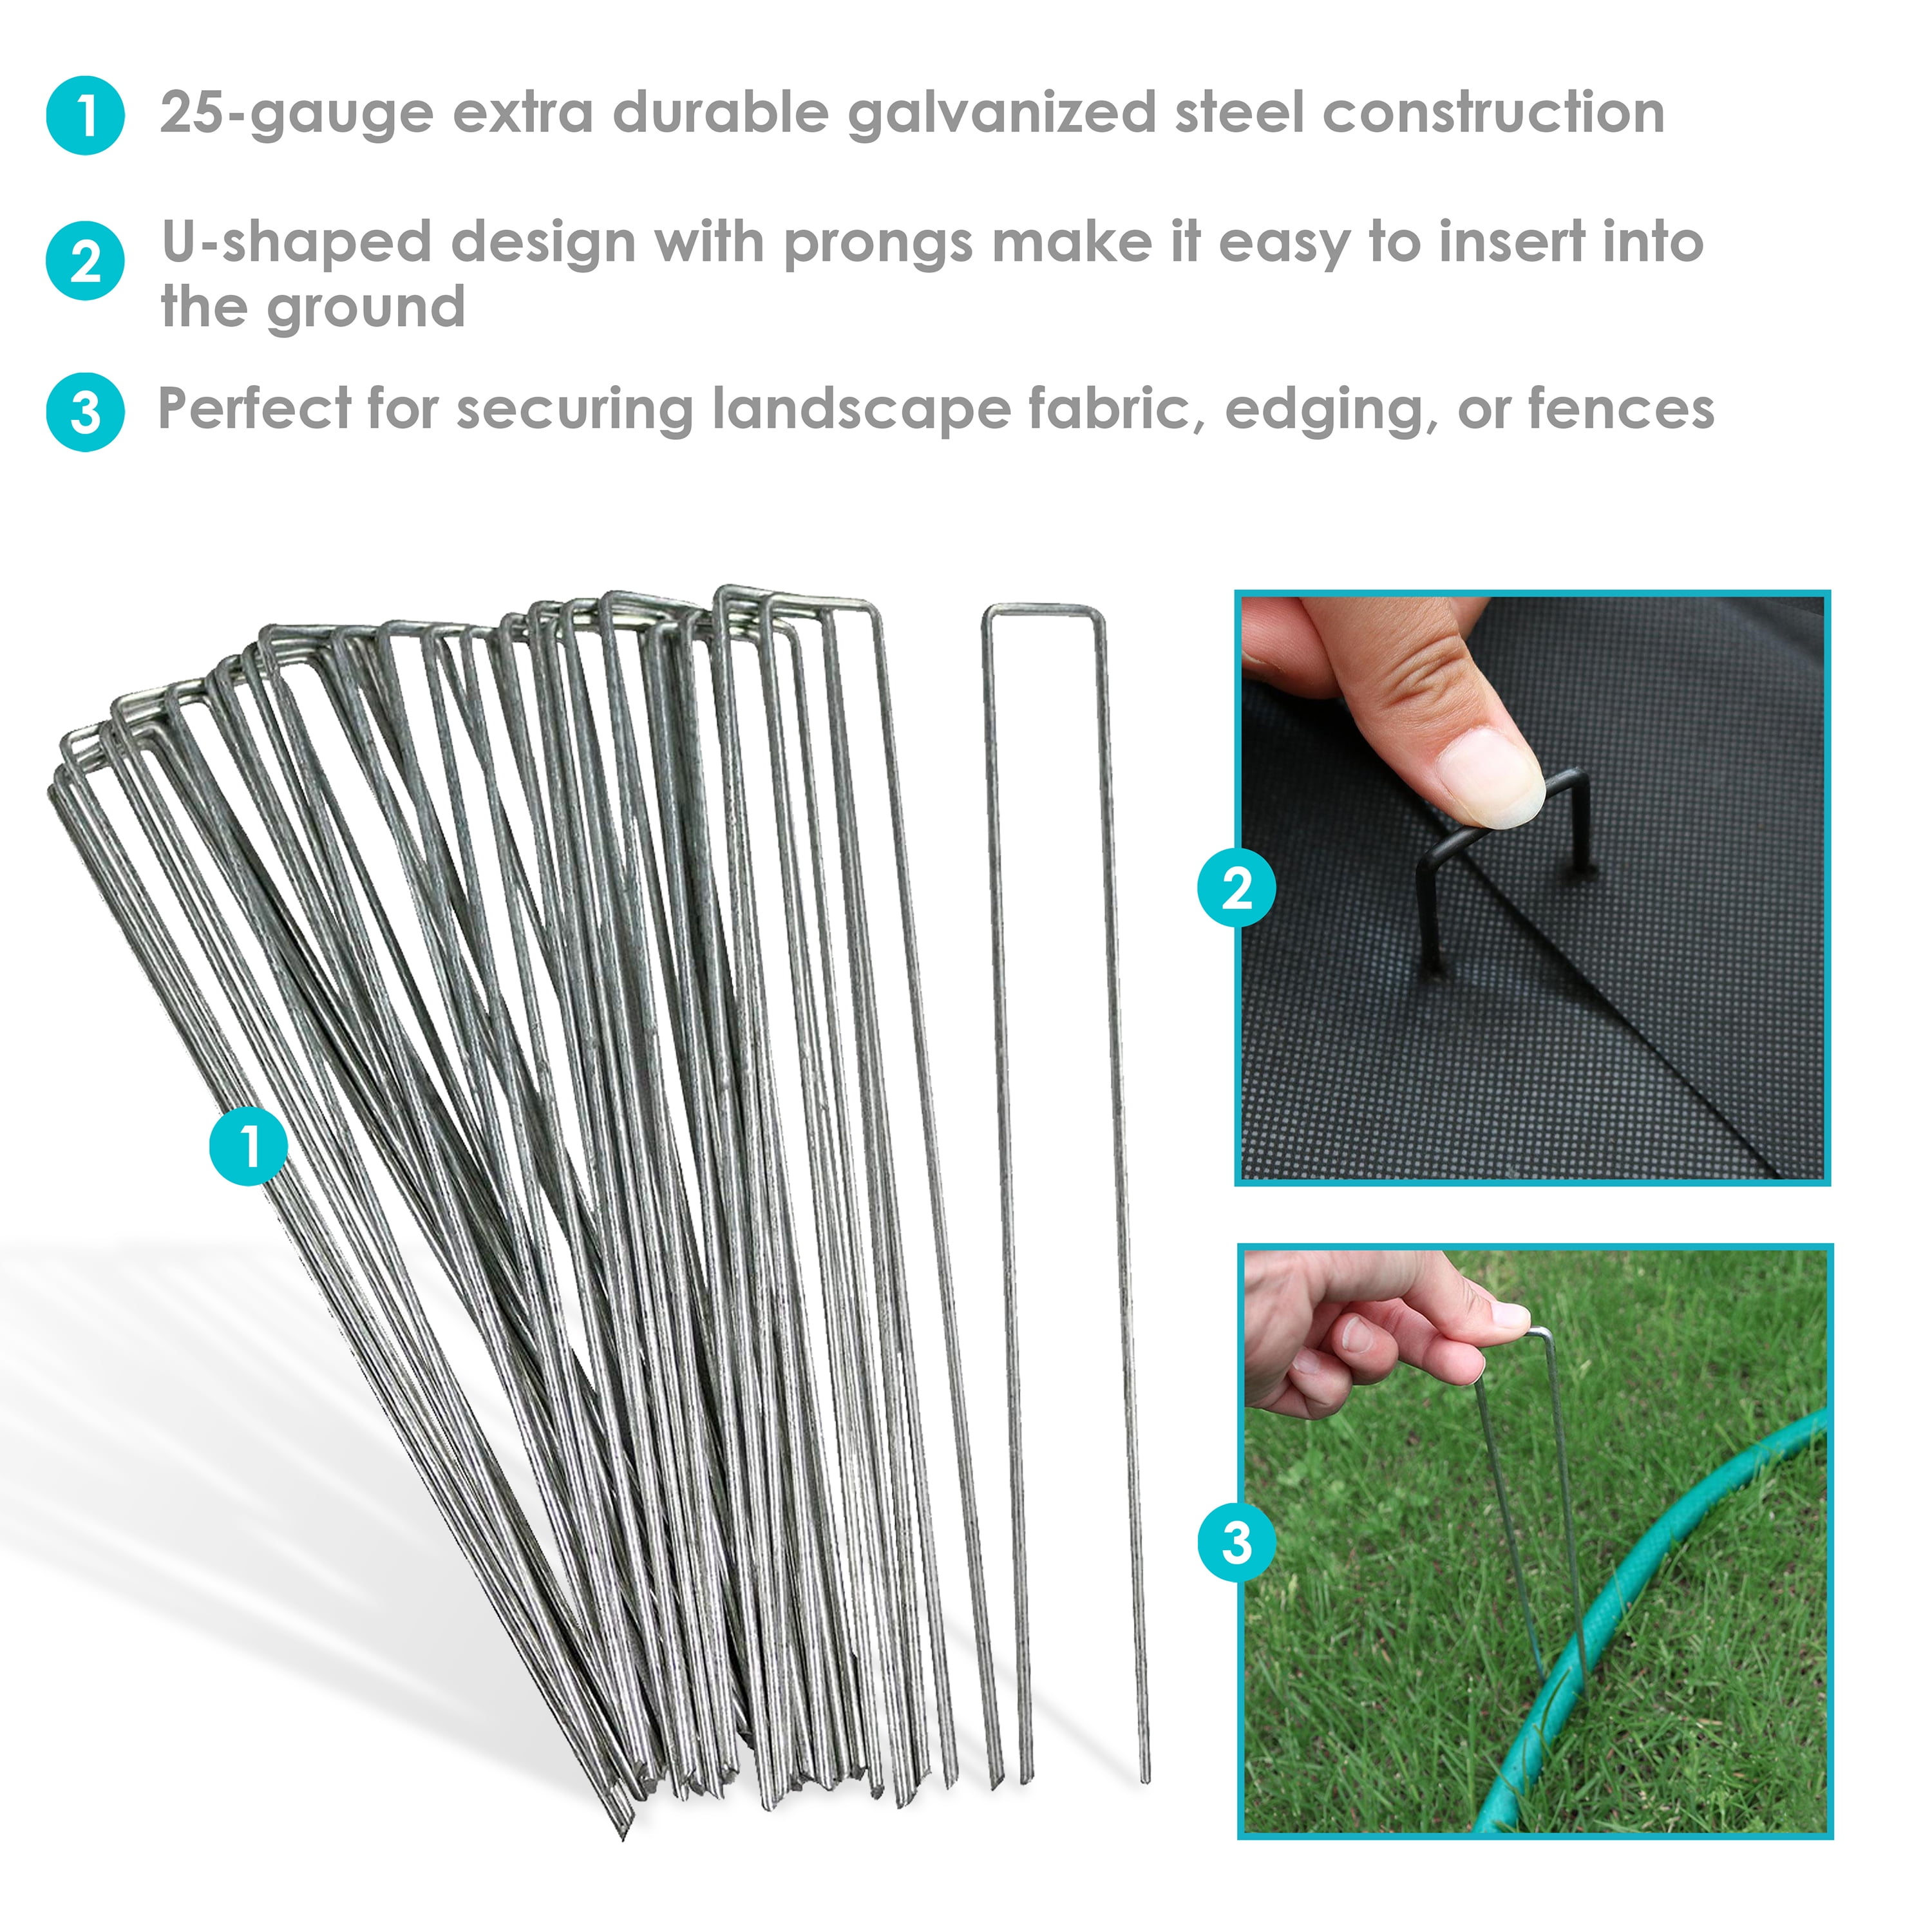 Weed Barrier and Tents Tarps DISTINCTIVE STYLE Garden Stakes for Xmas Decorations 20 Pieces 12 Inch Heavy Duty Ground Anchors Anti-Rust Galvanized Steel Sod Staples for Securing Fences DS 